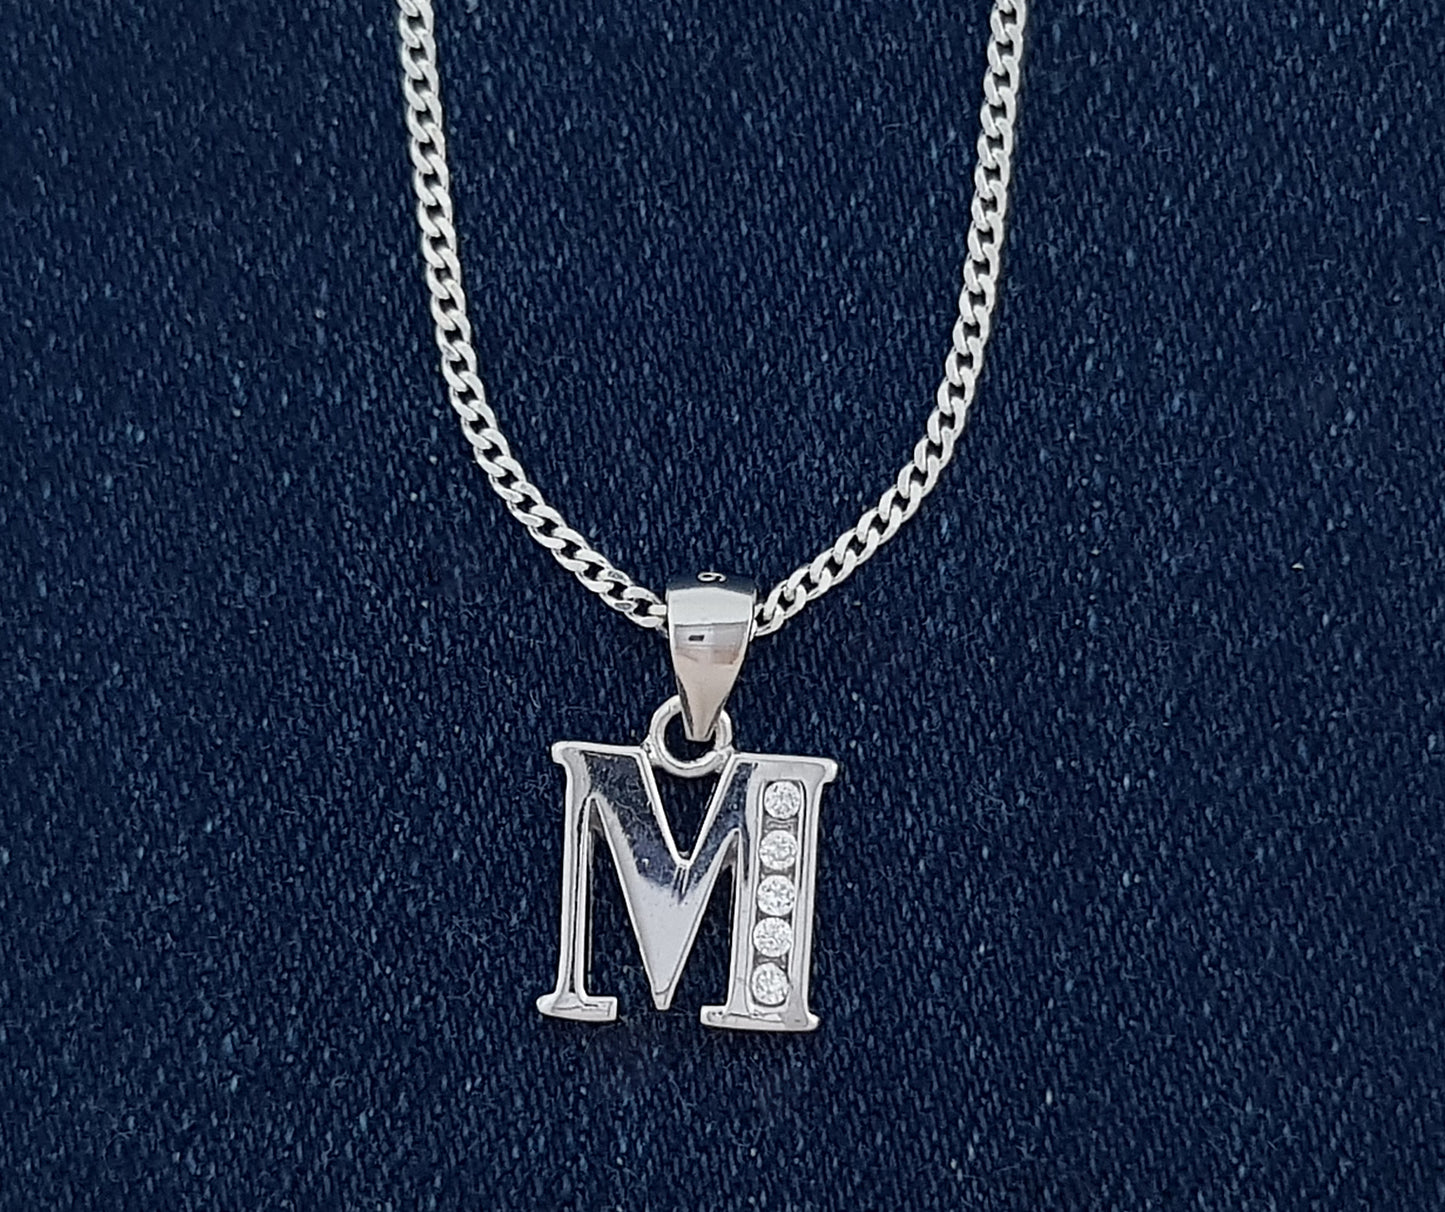 Sterling Silver Initial with Cubic Zirconia Stones- "M" Initial or Letter